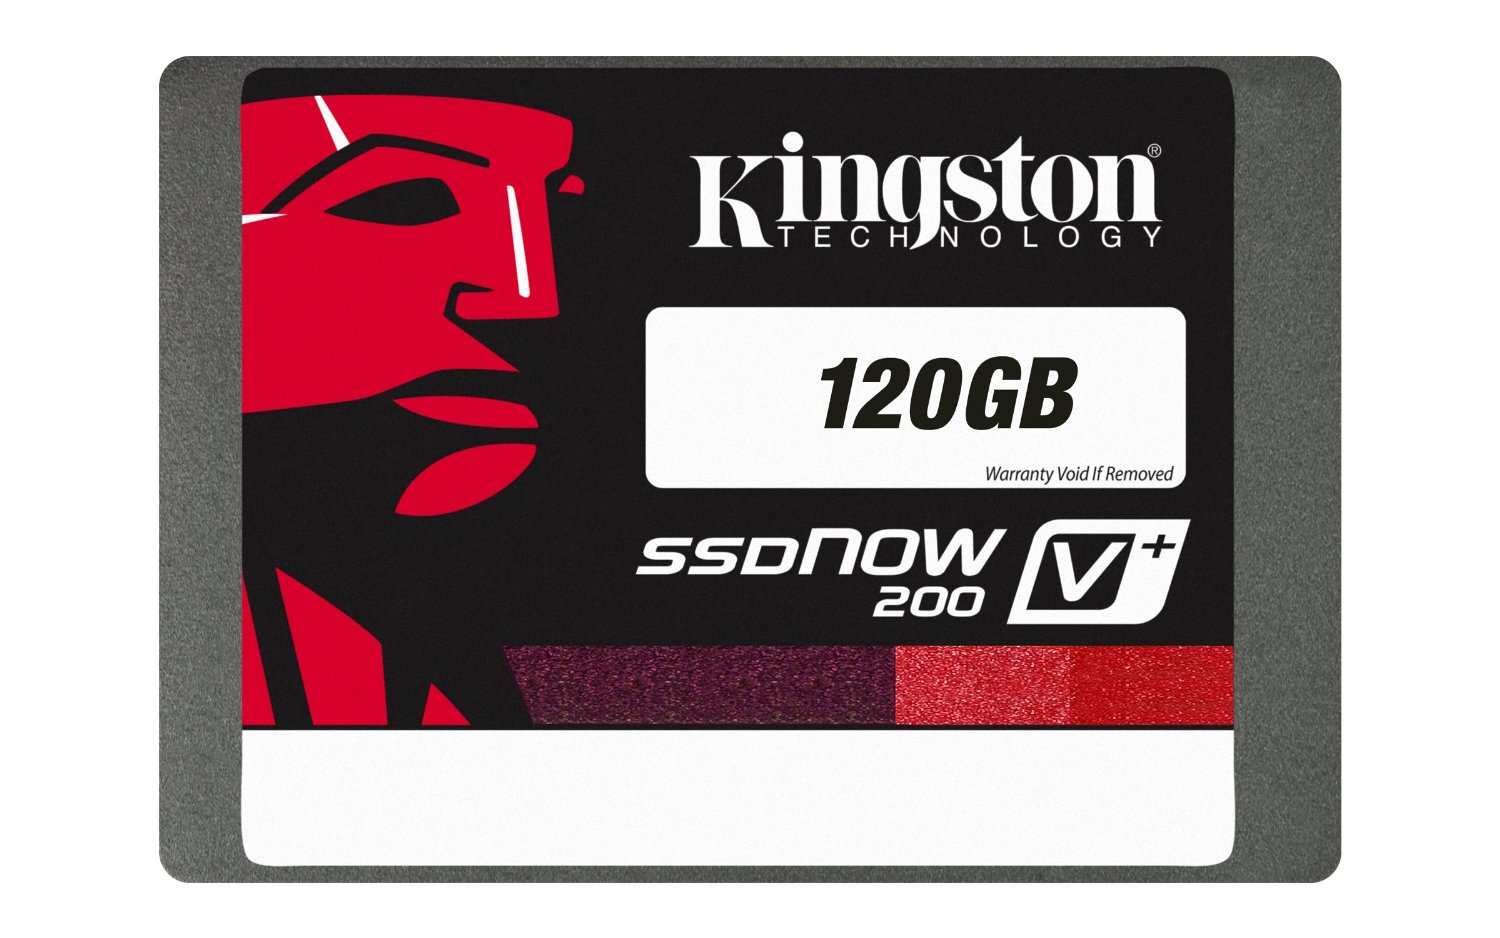 Kingston SSDNow V+200 120GB SATA 3 2.5-Inch Solid State Drive with Adapter KR-S3020-3H  $89.99